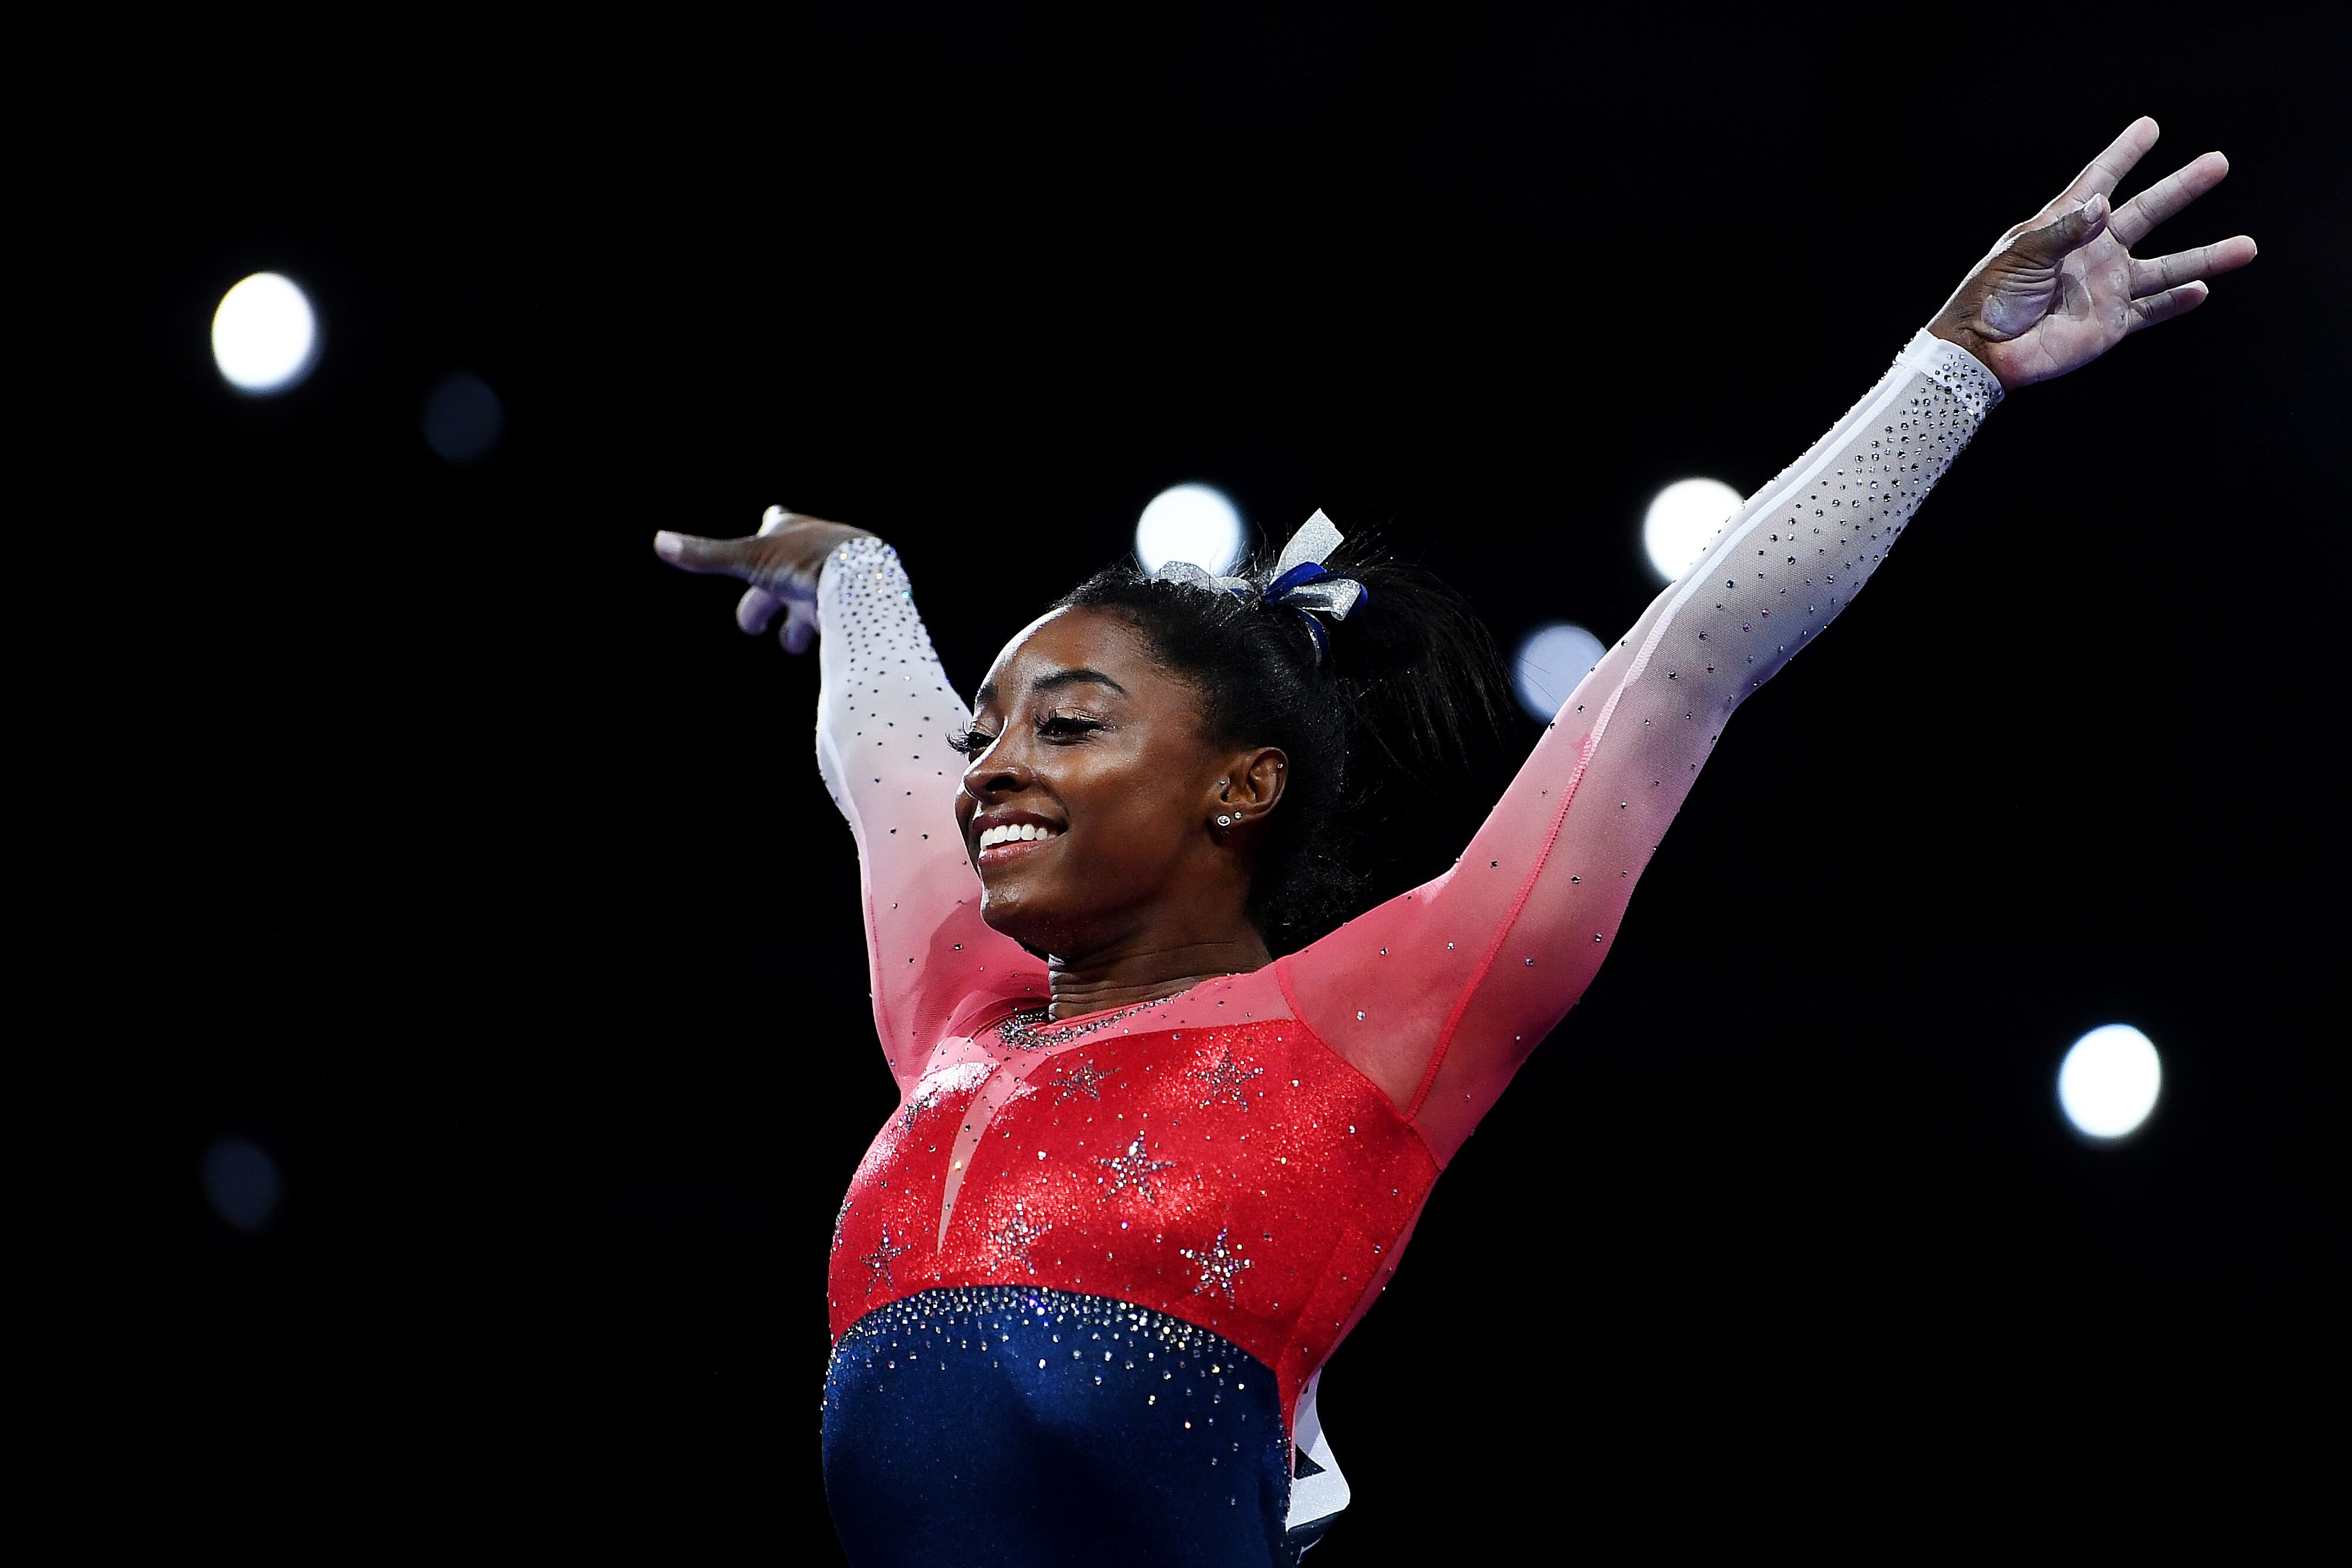 Simone Biles during her performance in the FIG Artistic Gymnastics World Championships on October 8, 2019. | Photo: Getty Images